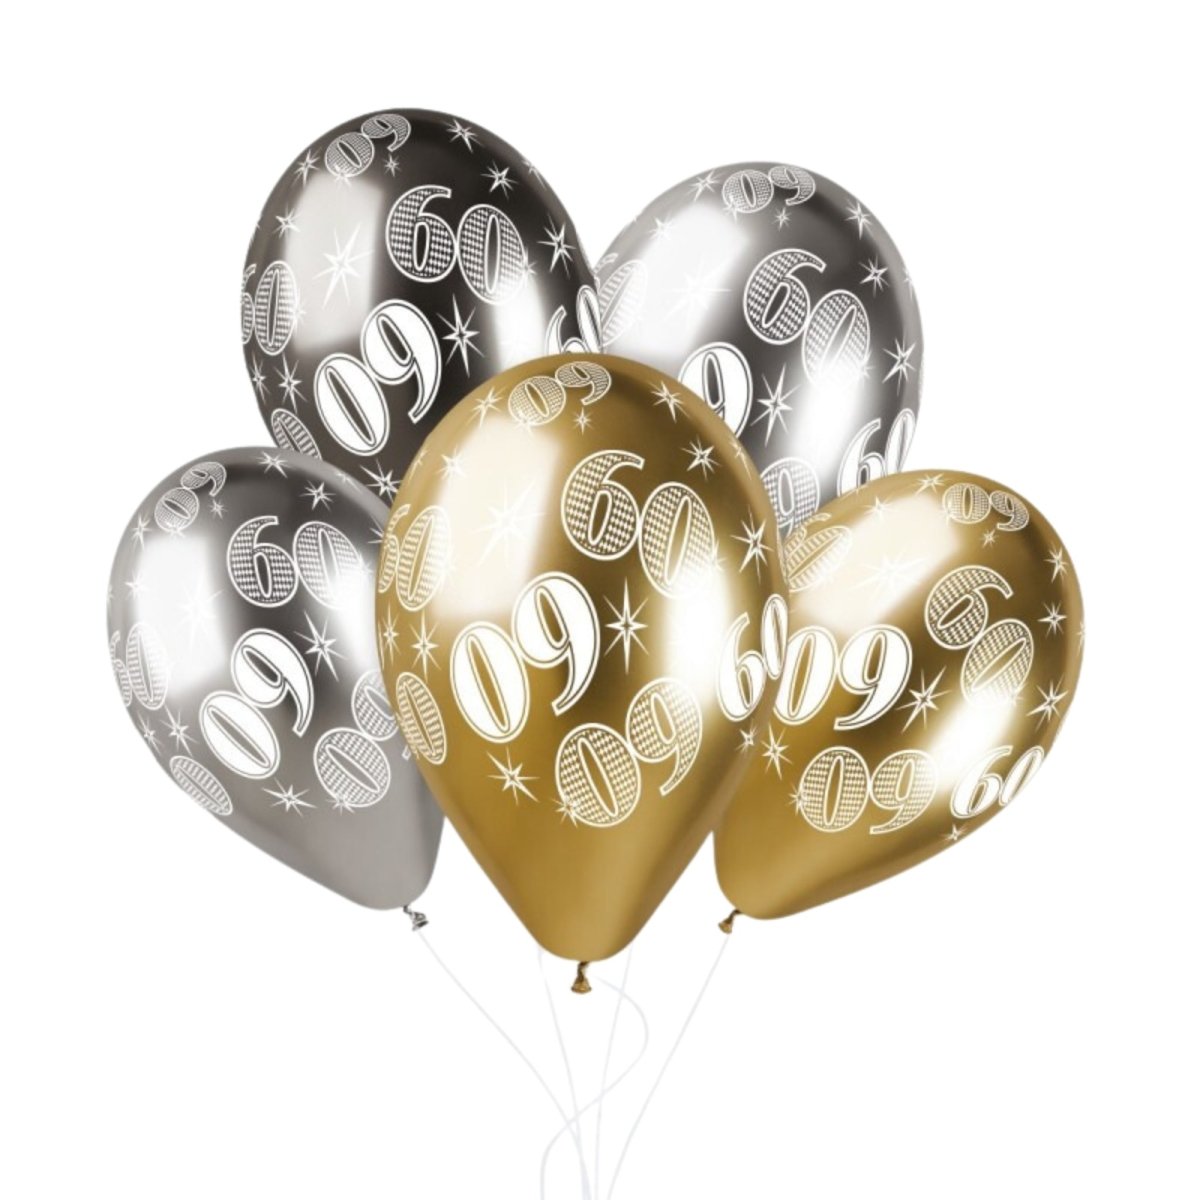 Happy 60th Birthday Balloons - Silver, Gold or Black - Kids Party Craft